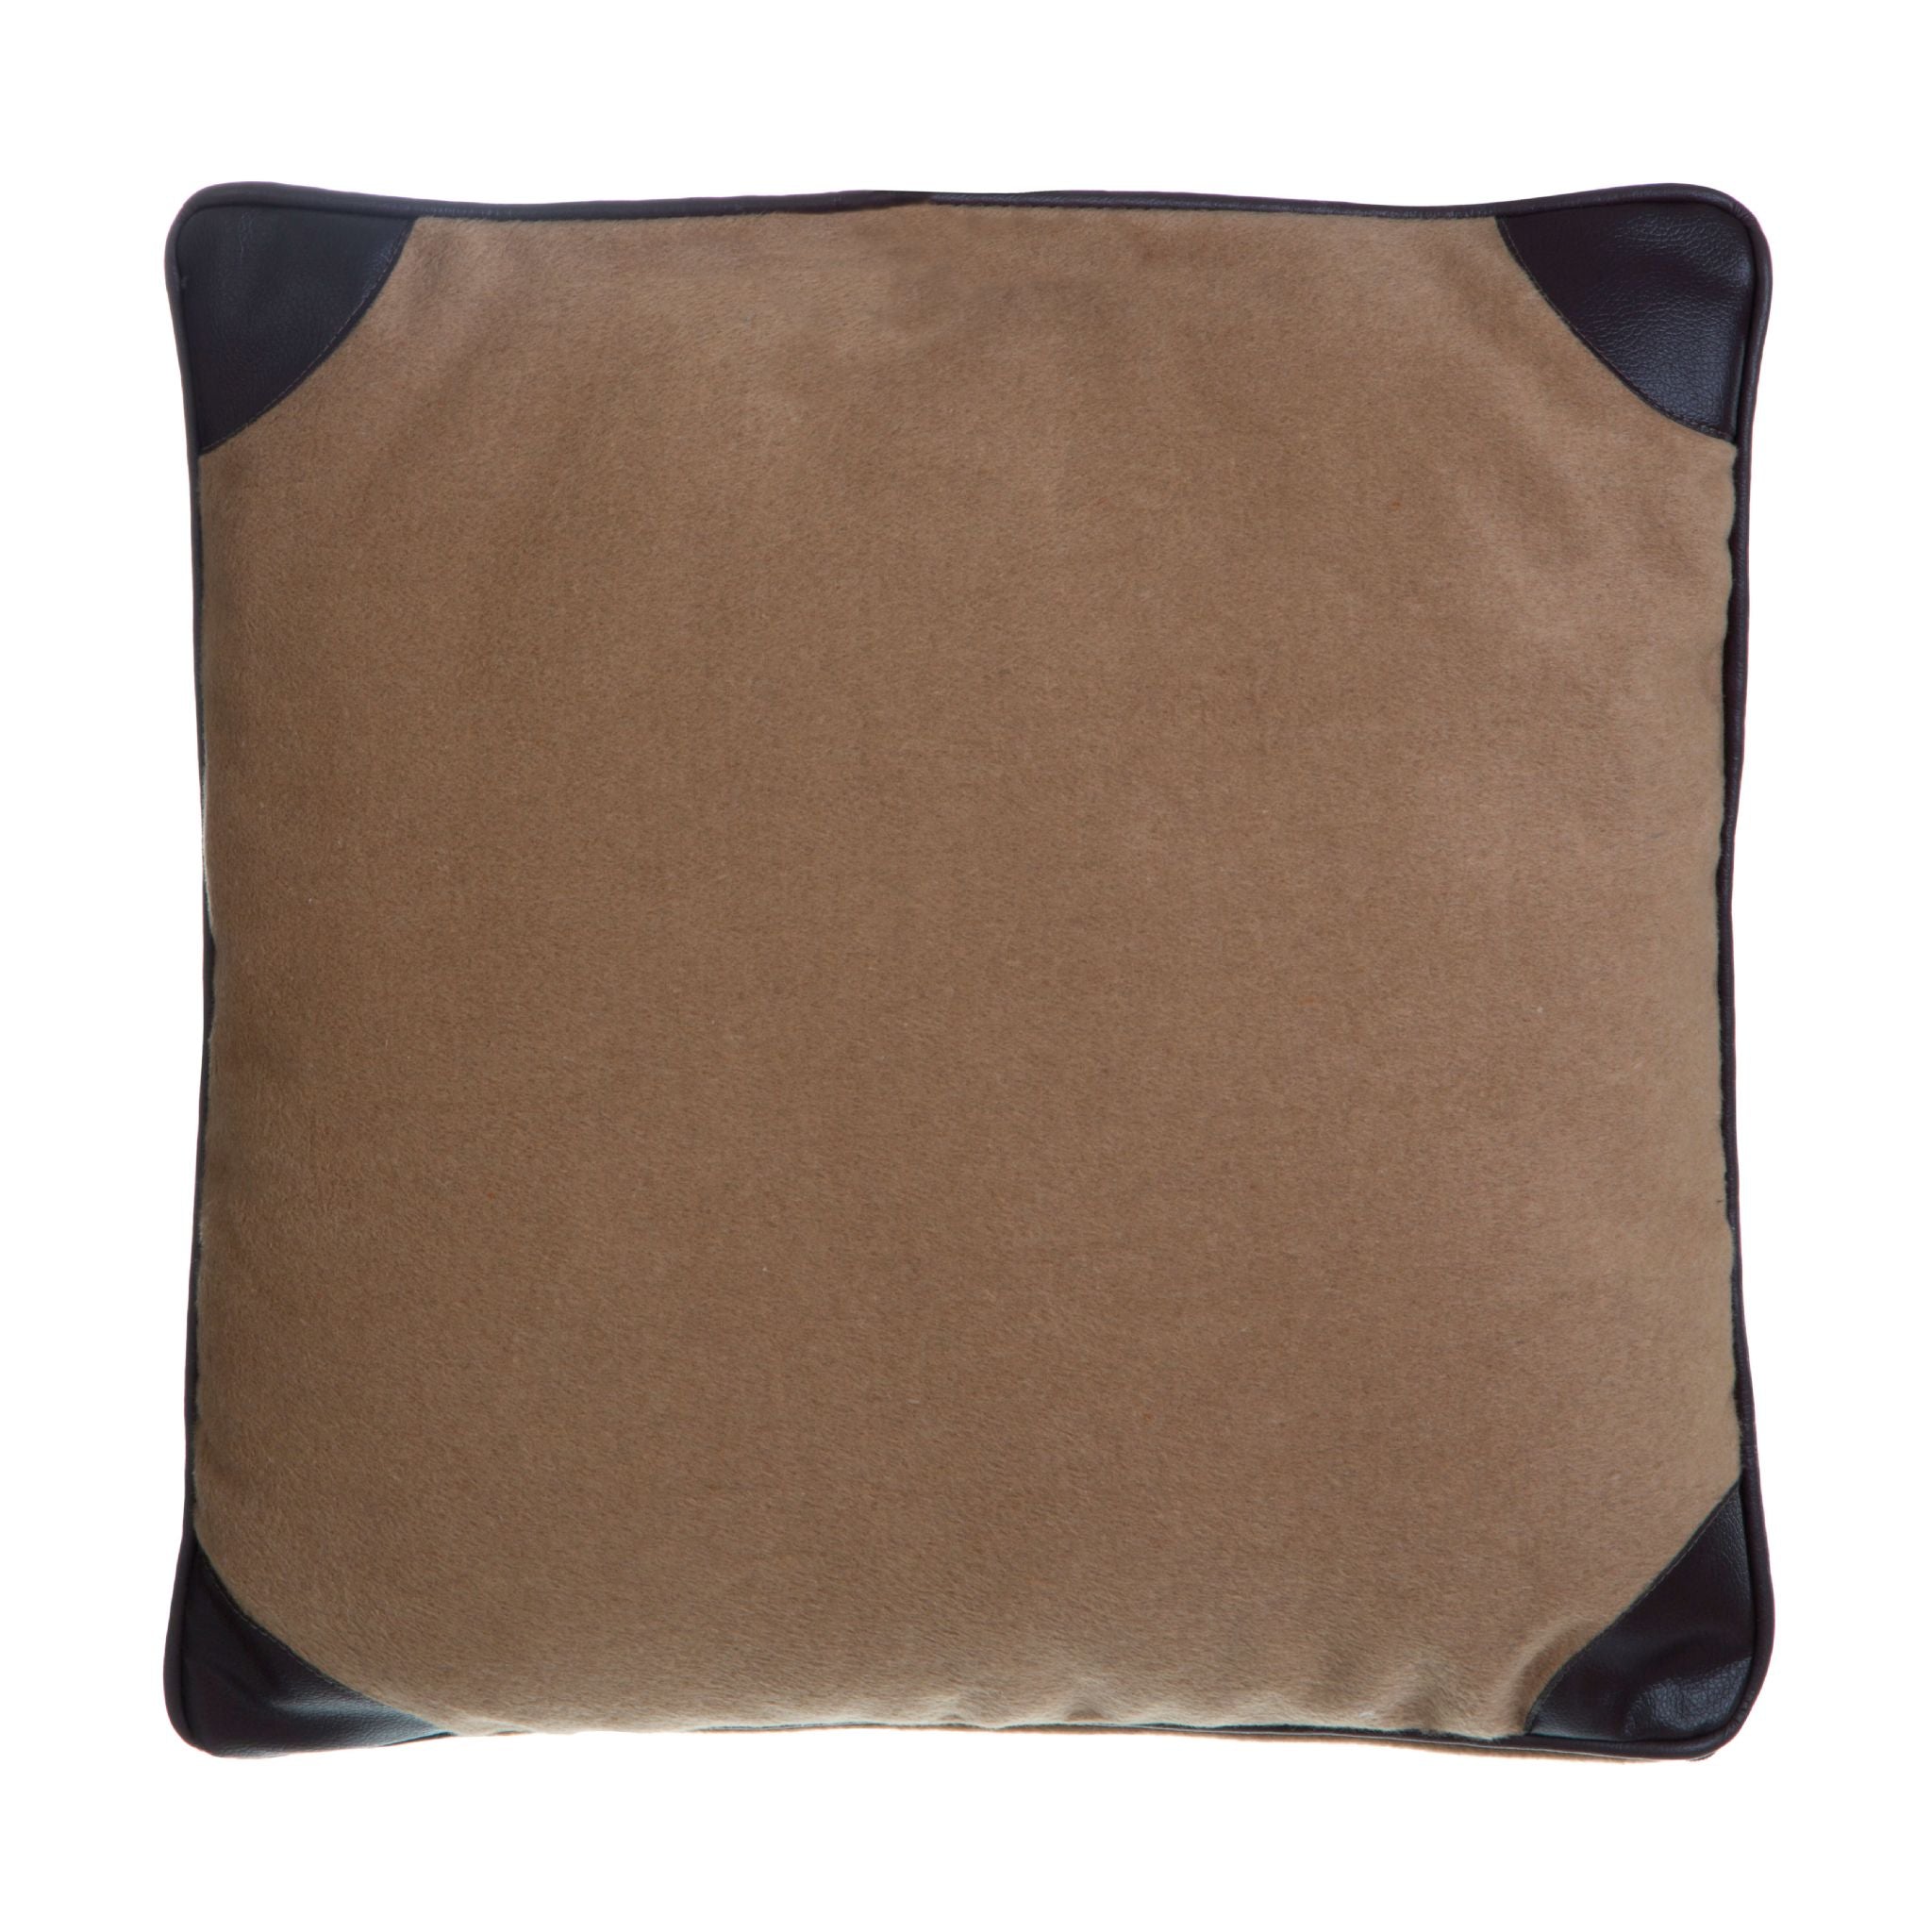 Textured Cushion - Outlet - Save 20%